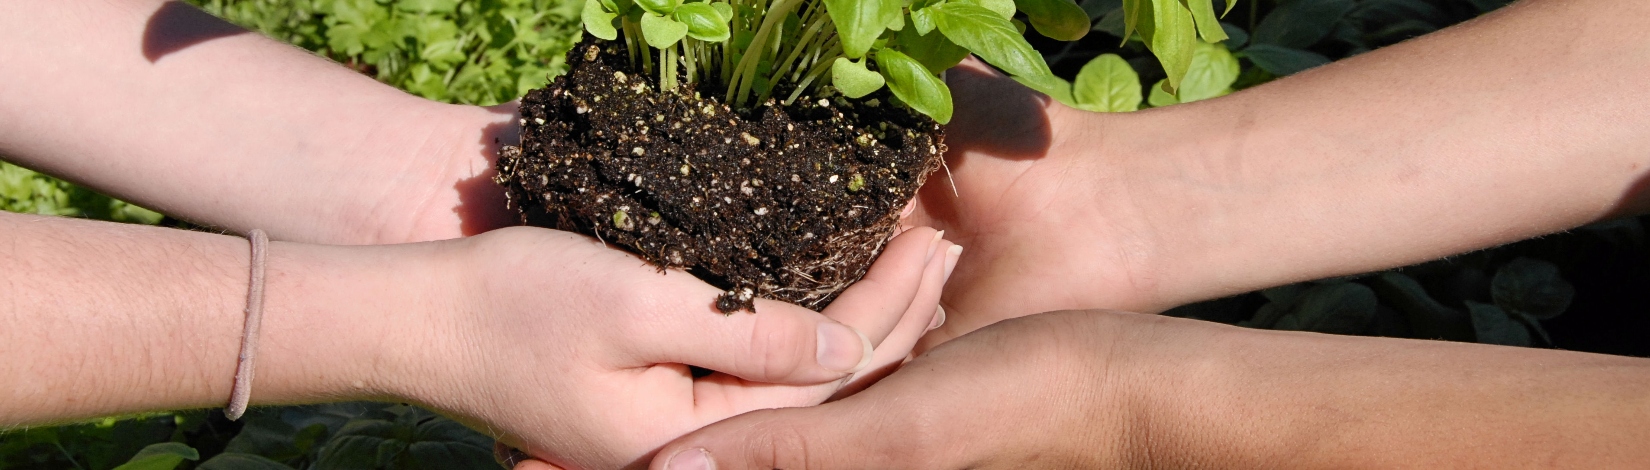 Children’s hands holding soil and herbs.   